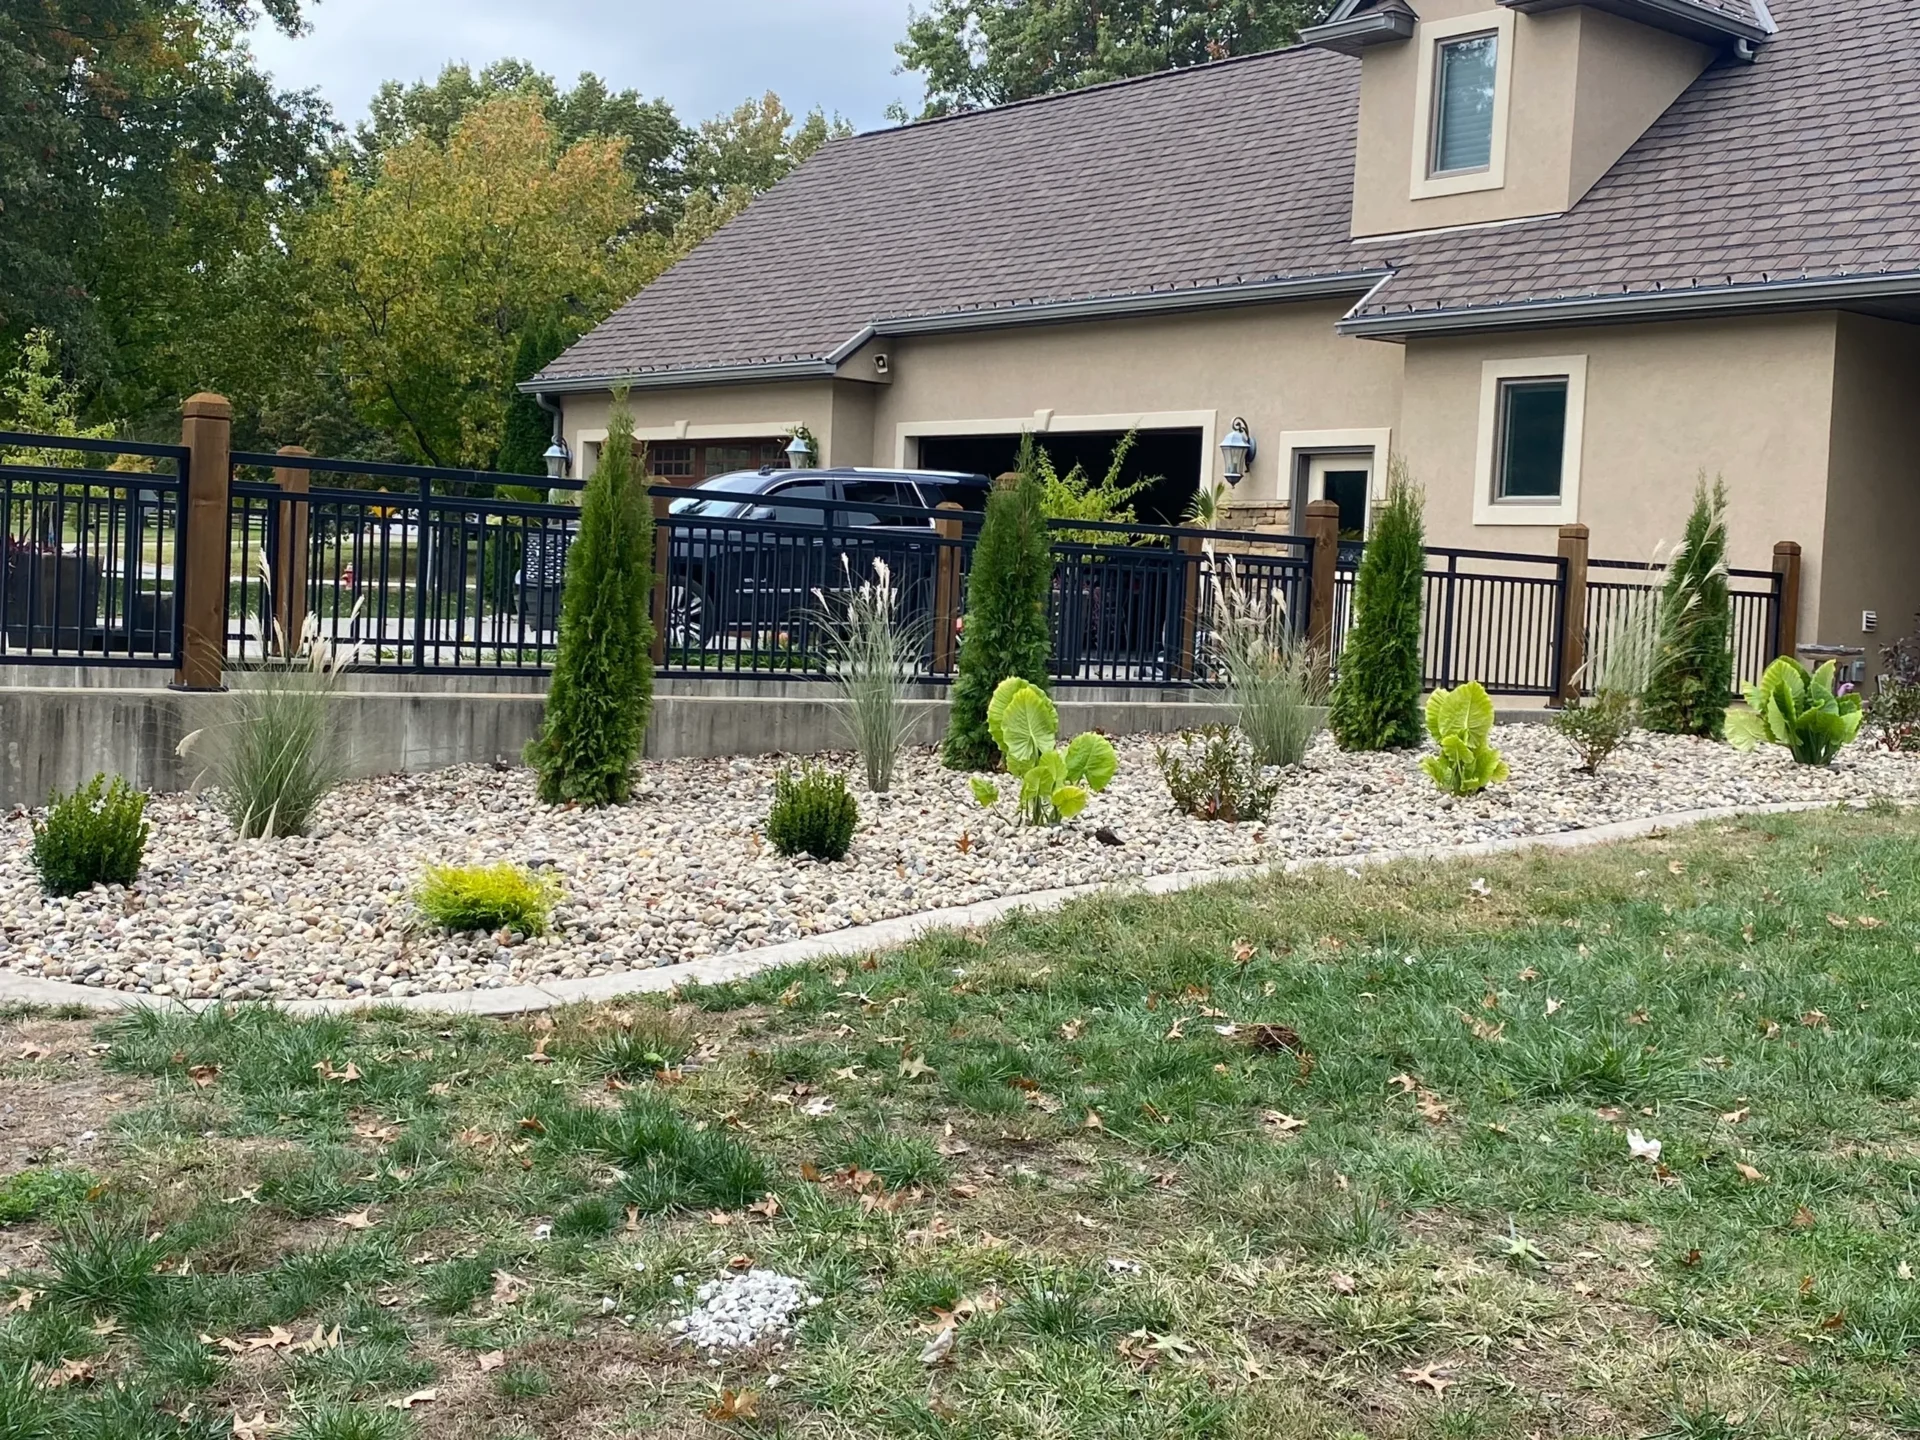 A yard with a fence and bushes in the background.